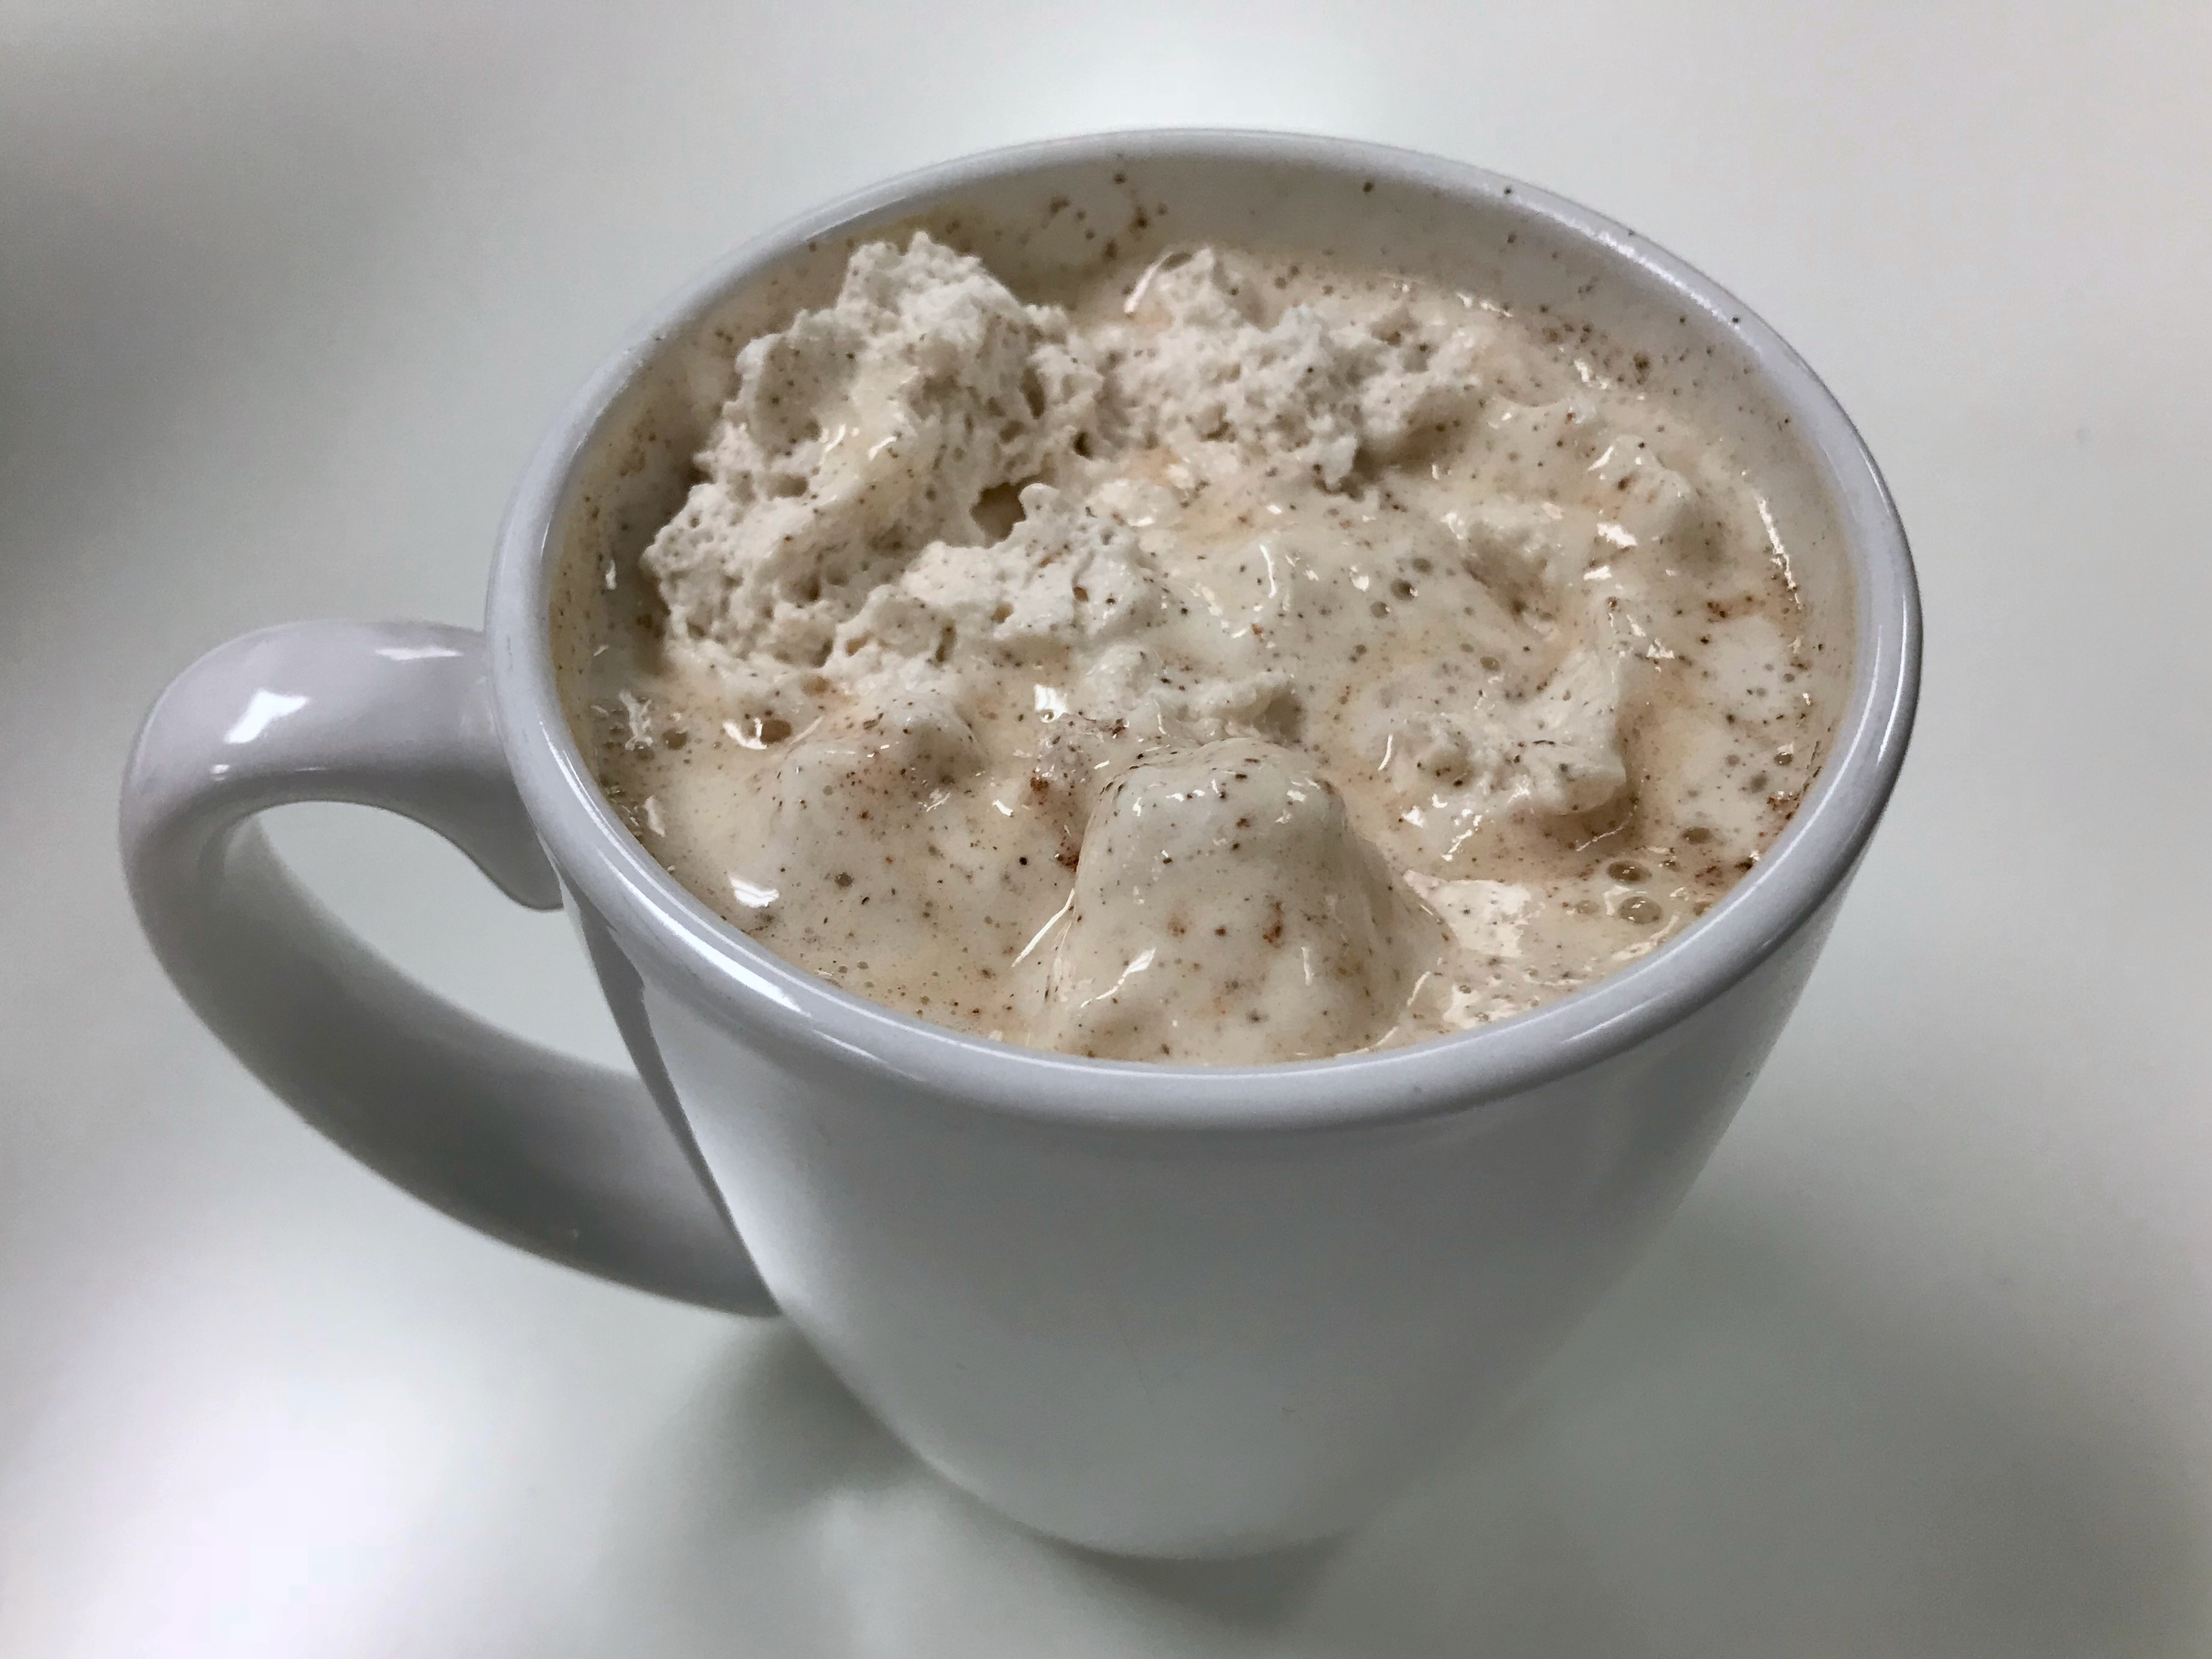 A mug topped with a melty white whipped cream with flecks of spices.